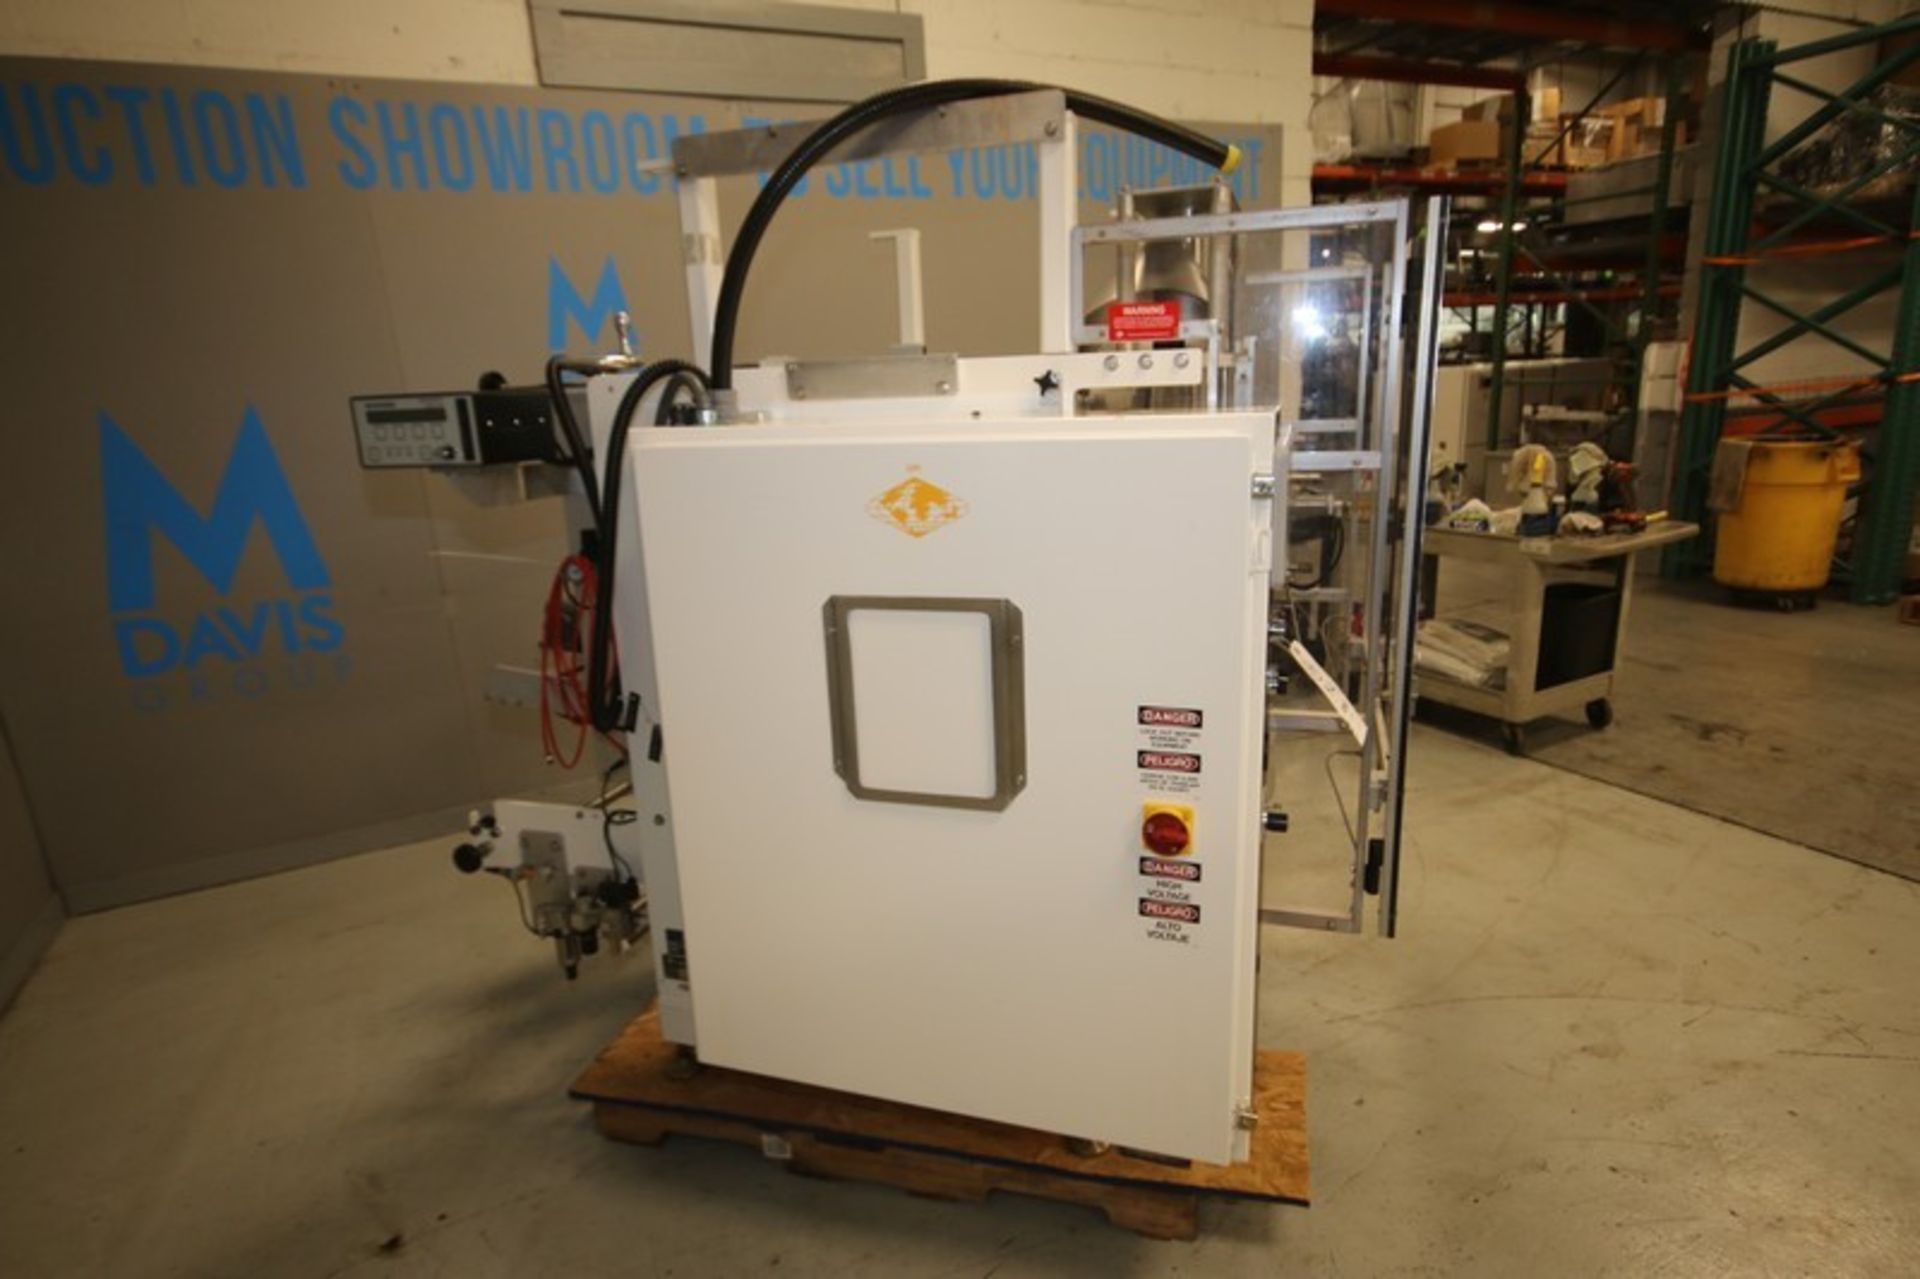 Universal Packaging Vertical Form Fill & Seal Packaging Machine (VFFS), Model S2000C, SN 1711, - Image 4 of 12